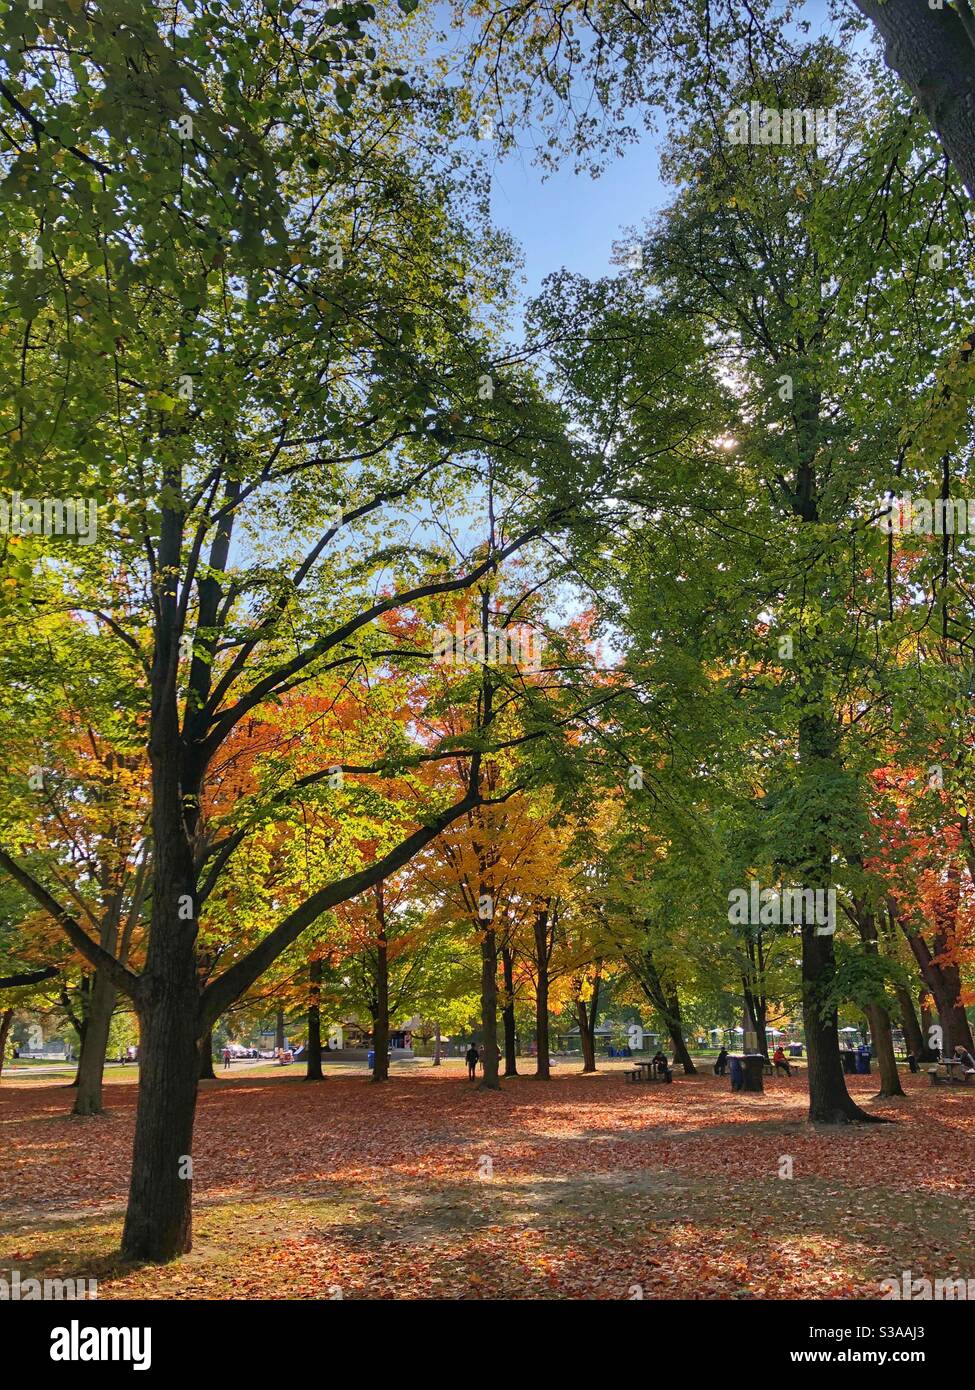 Autumn is in the air. Stock Photo